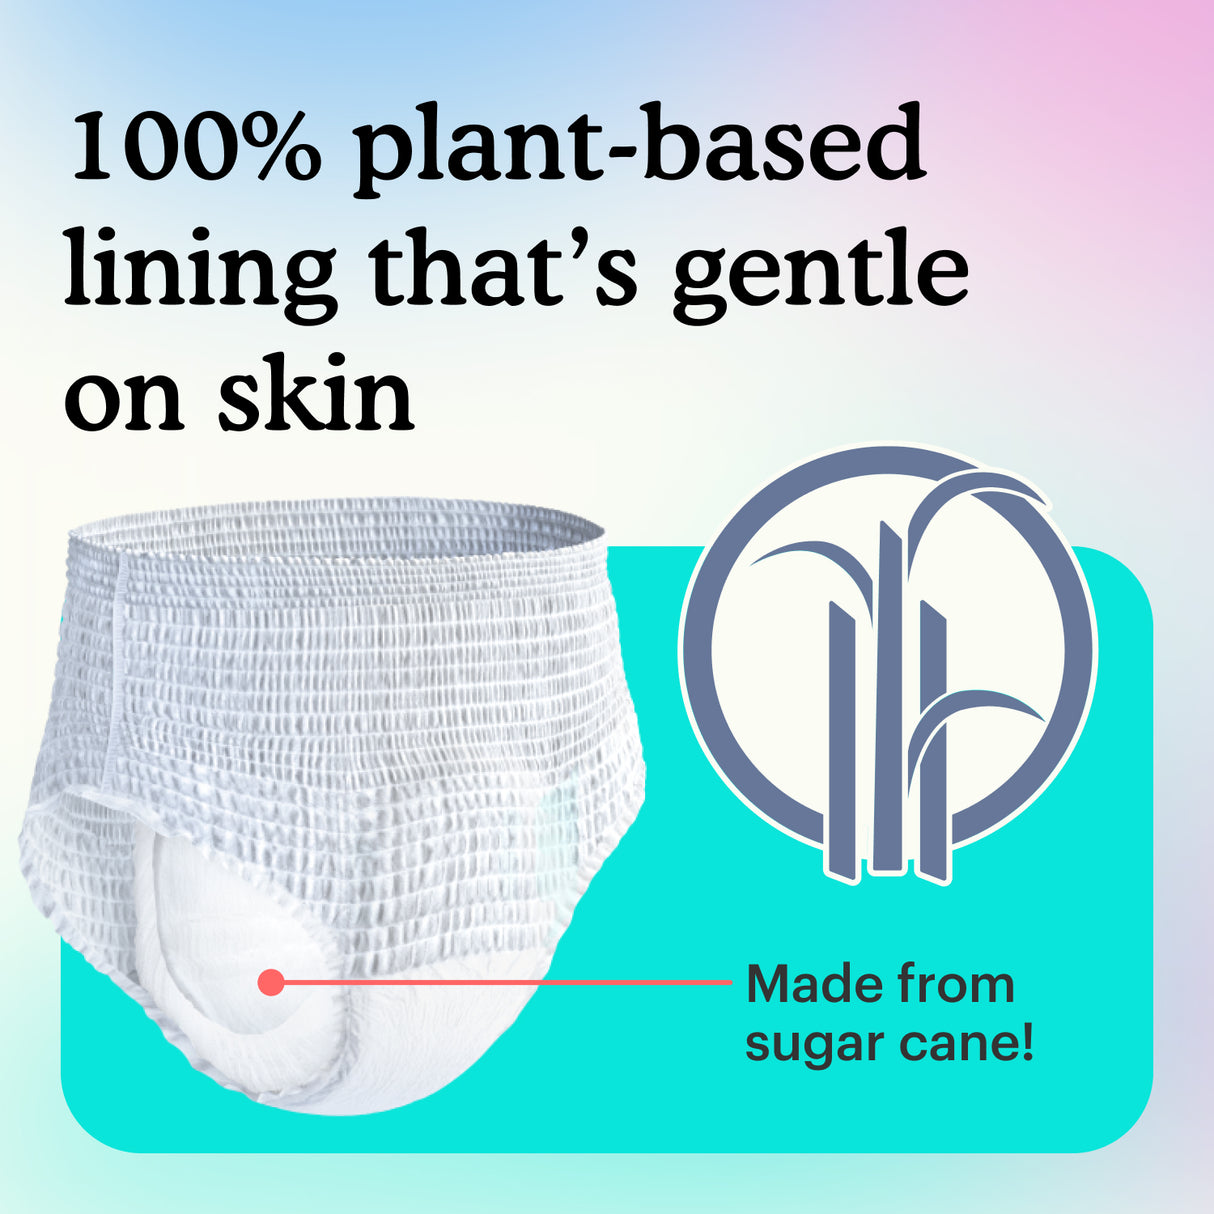 100% plant-based lining that's gentle on skin. Made from sugar cane!